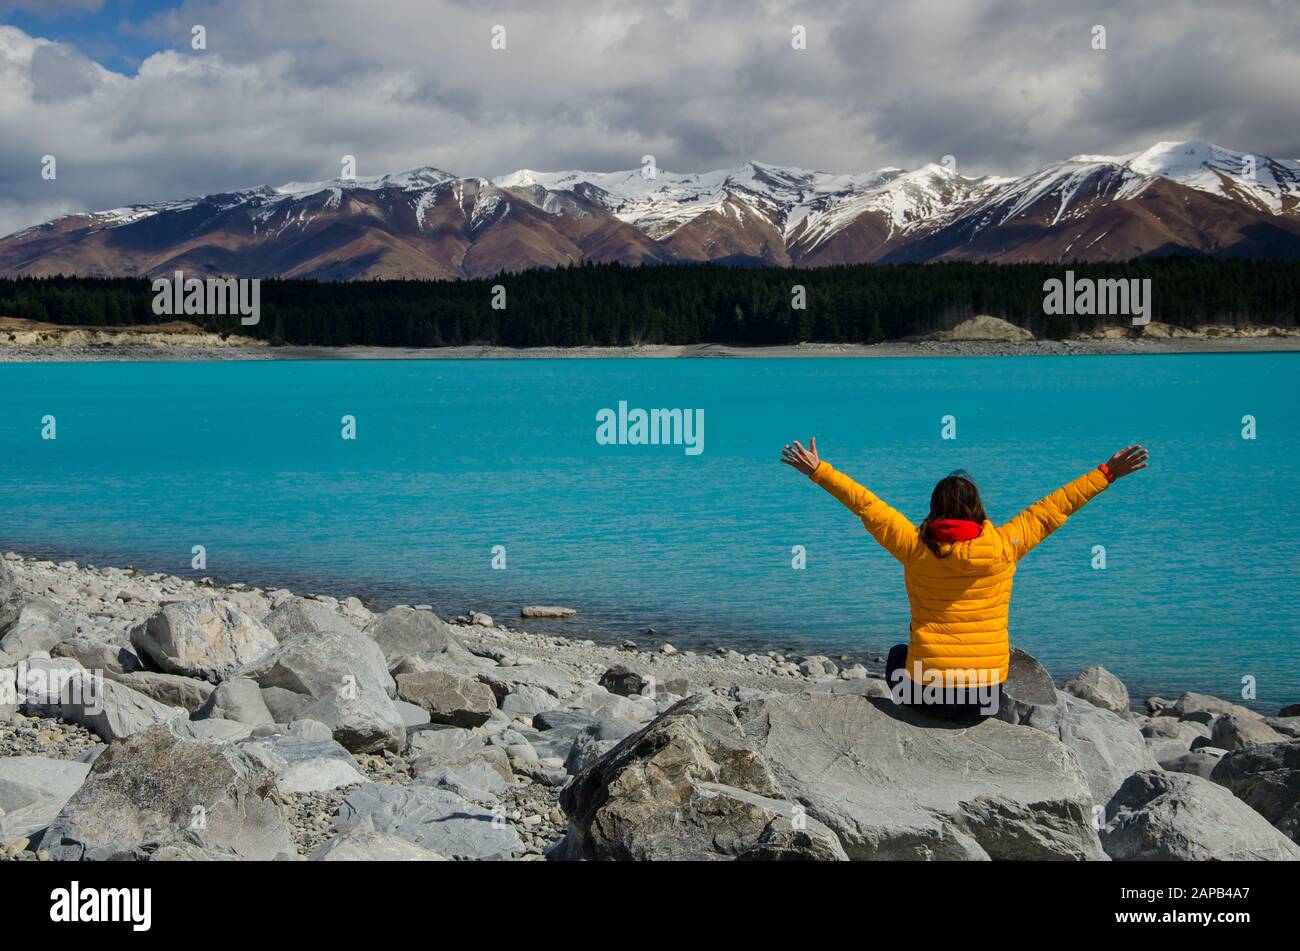 Lake Pukaki with orange girl person and snow covered mountains, South Island, New Zealand Stock Photo